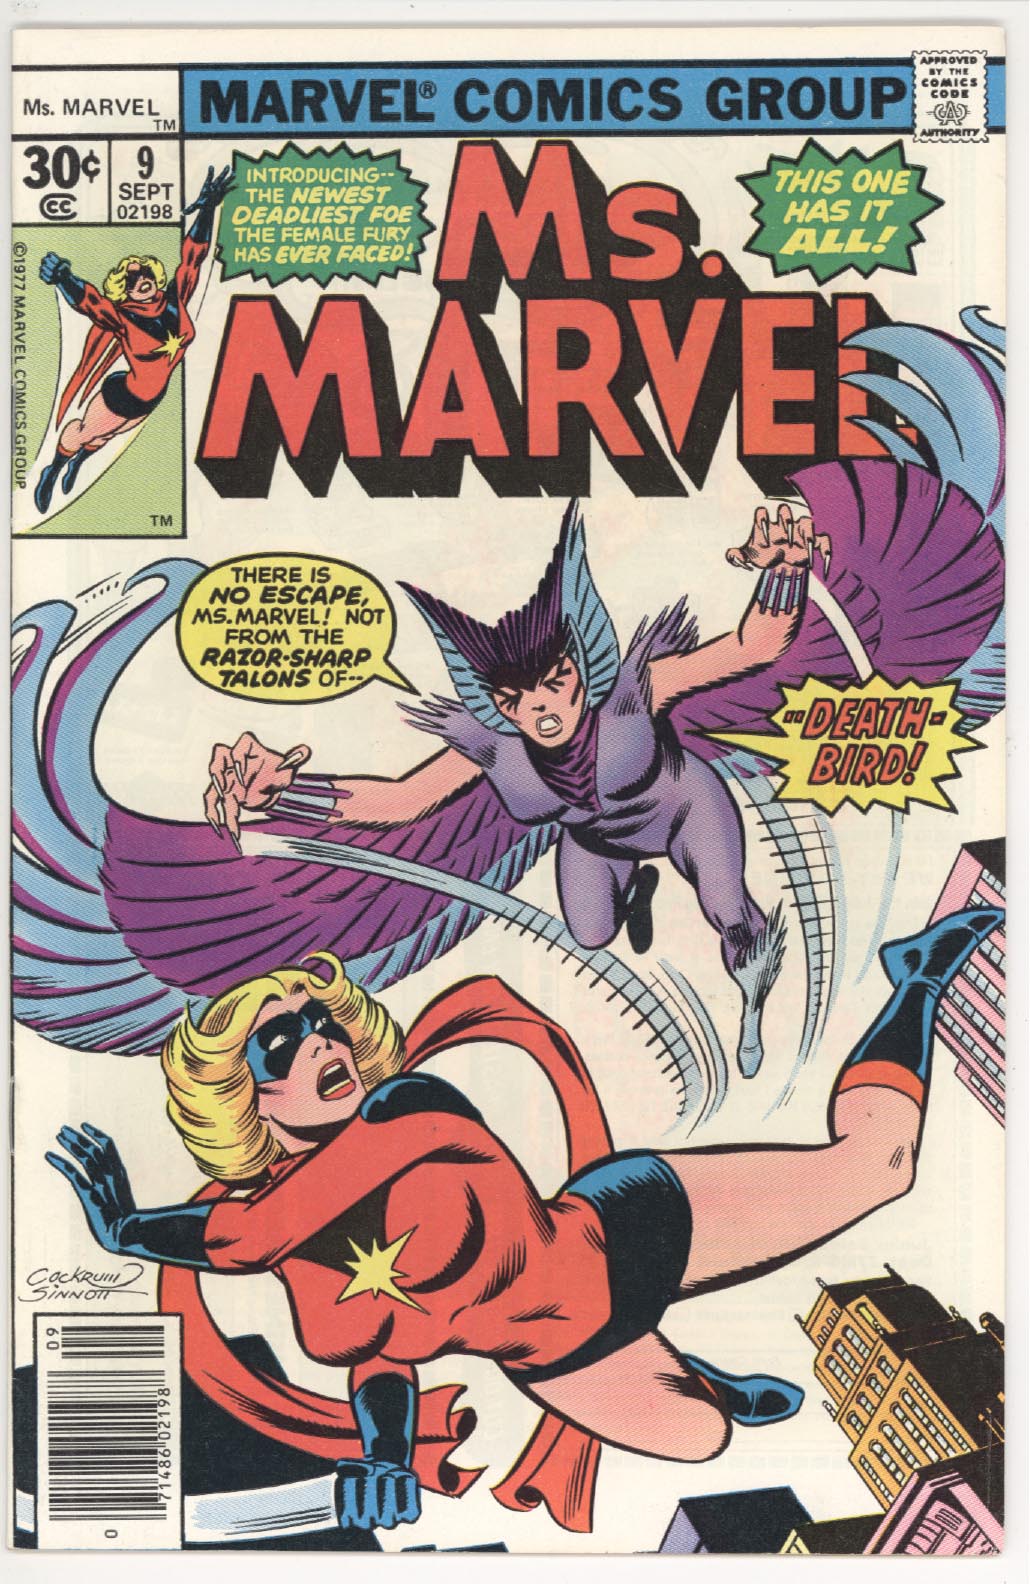 Ms. Marvel #9 front